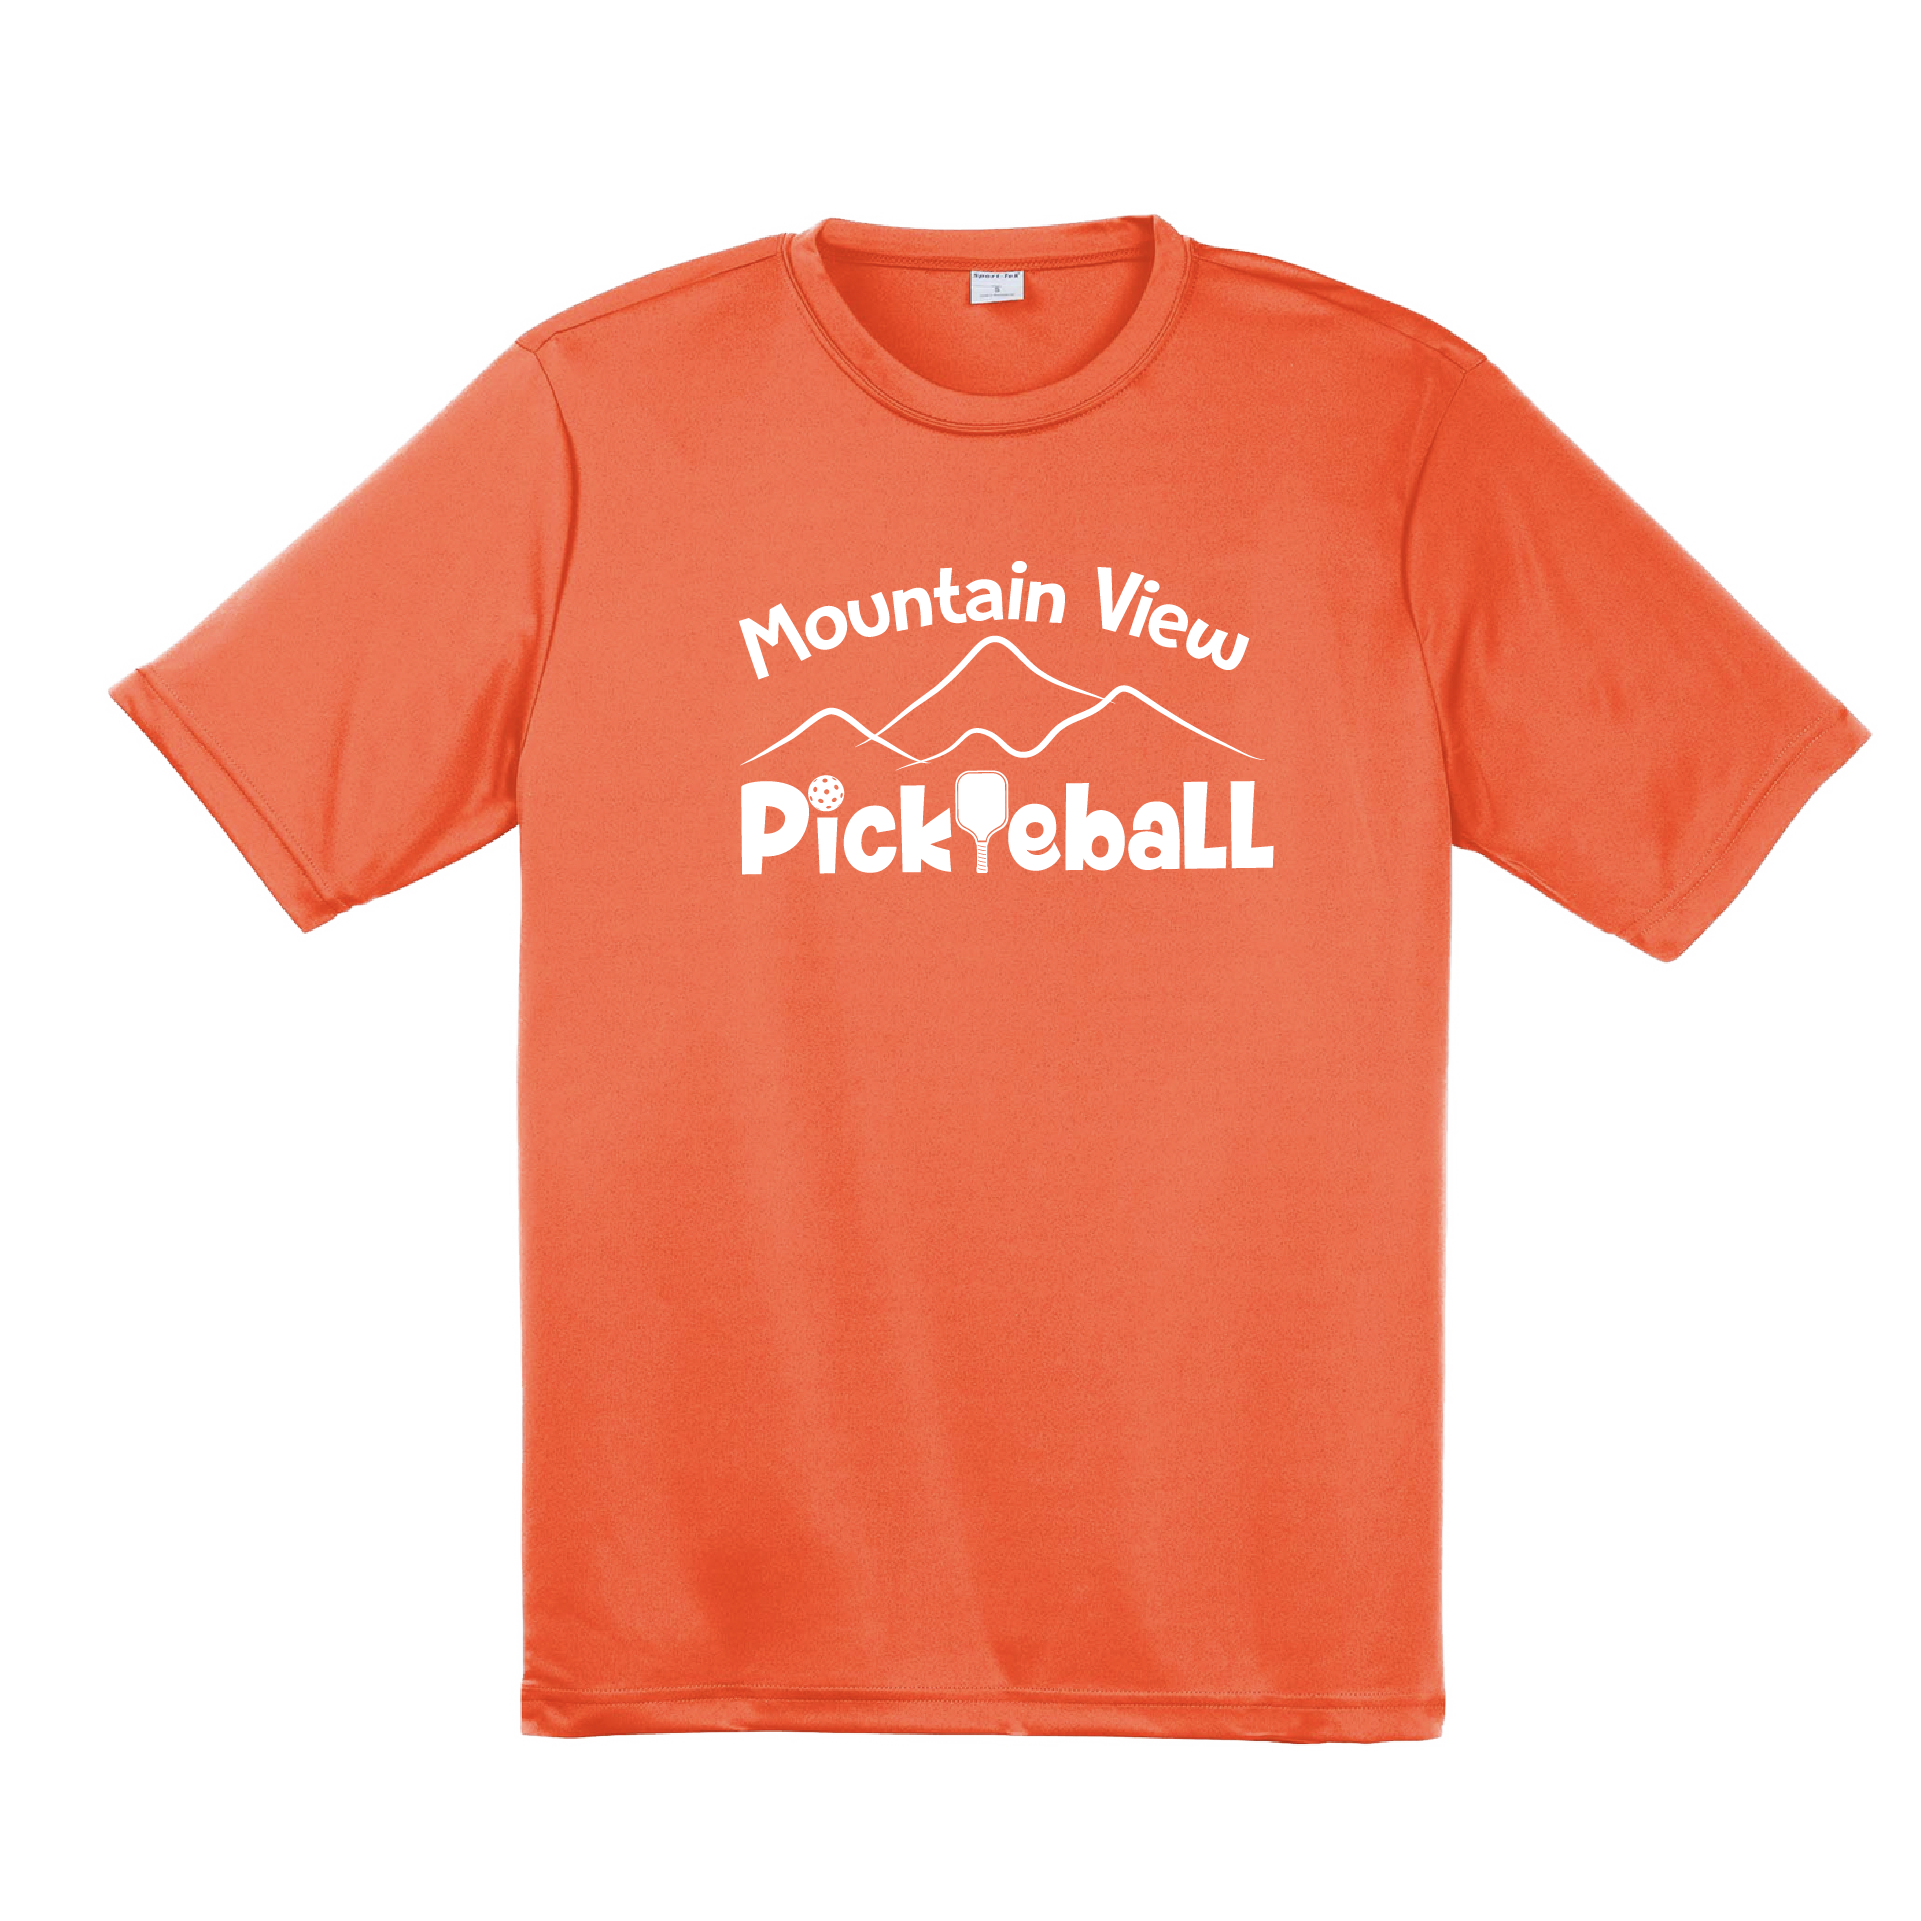 Pickleball Design: Mountain View Pickleball Club  Men's Styles: Short-Sleeve  Turn up the volume in this Men's shirt with its perfect mix of softness and attitude. Material is ultra-comfortable with moisture wicking properties and tri-blend softness. PosiCharge technology locks in color. Highly breathable and lightweight.